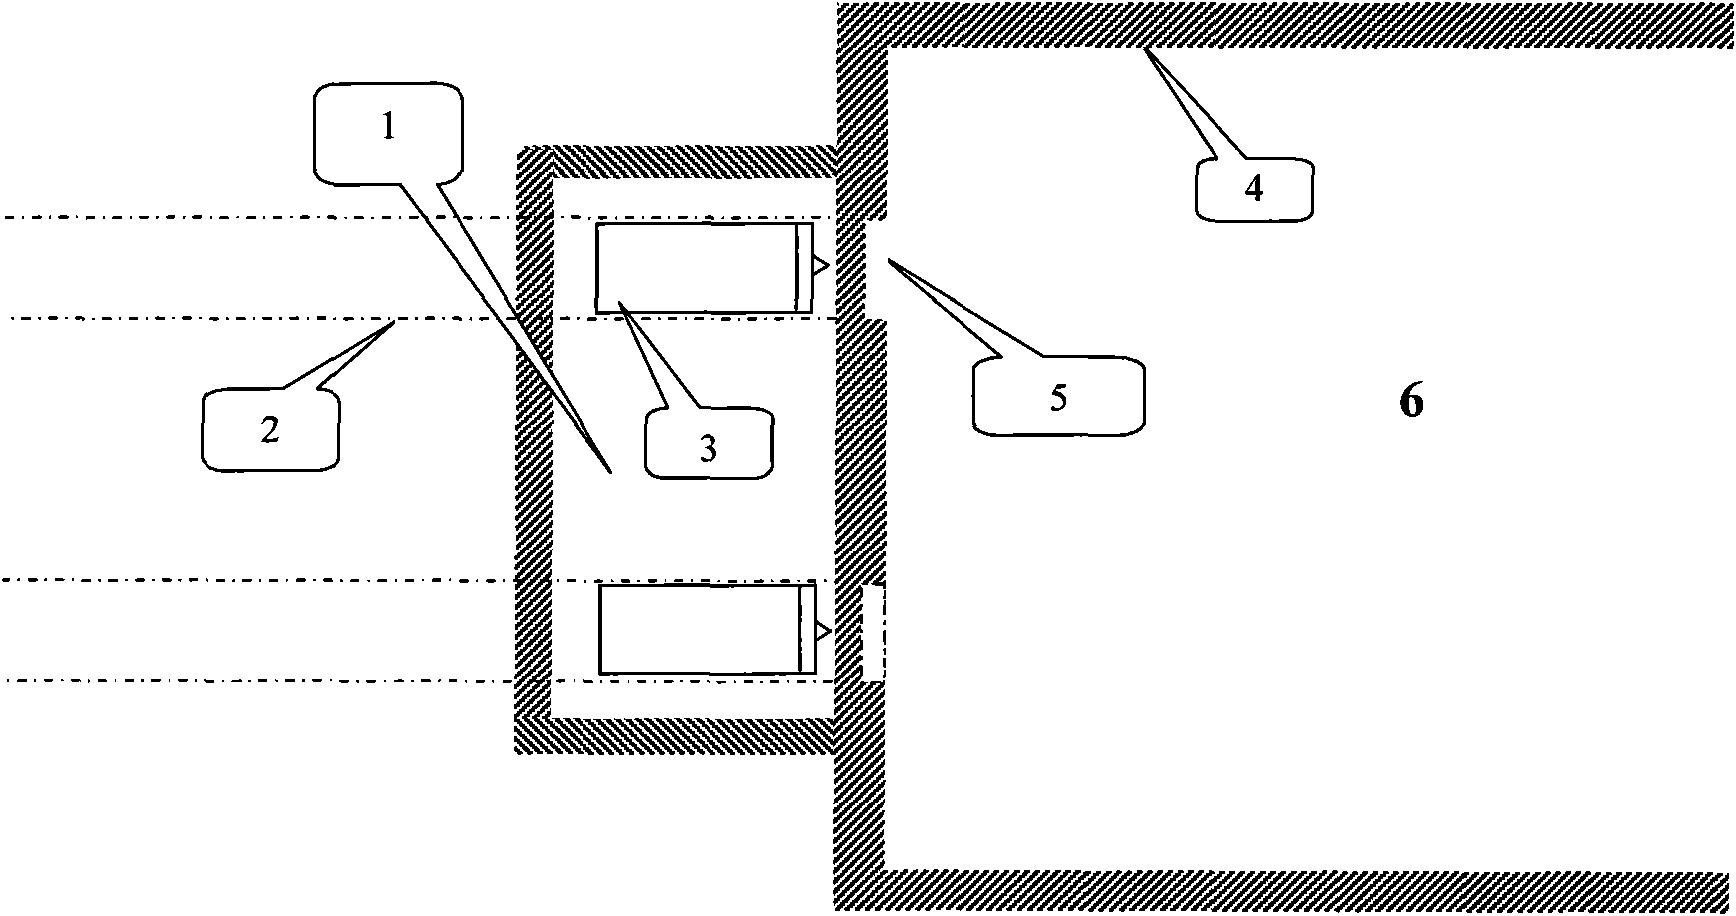 Double-well type reinforcement method of shield arrival or starting end and double-well type shield arrival method